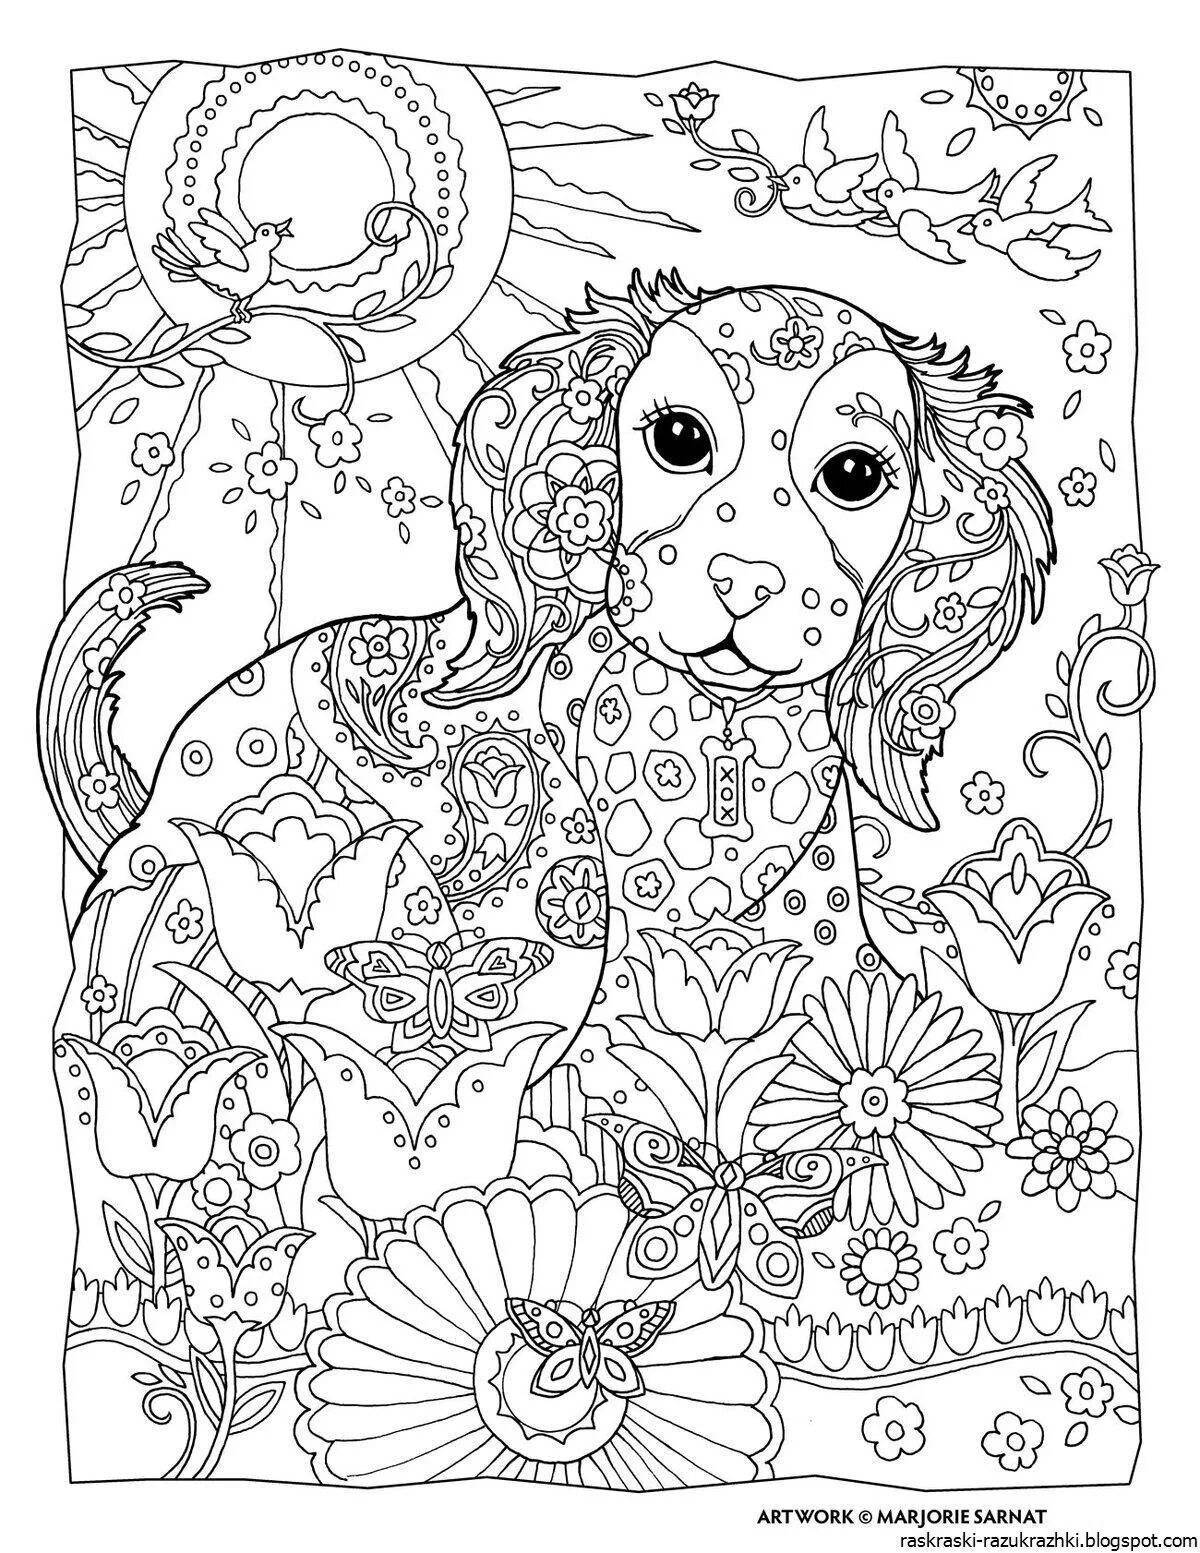 An inspirational anti-stress coloring book for girls